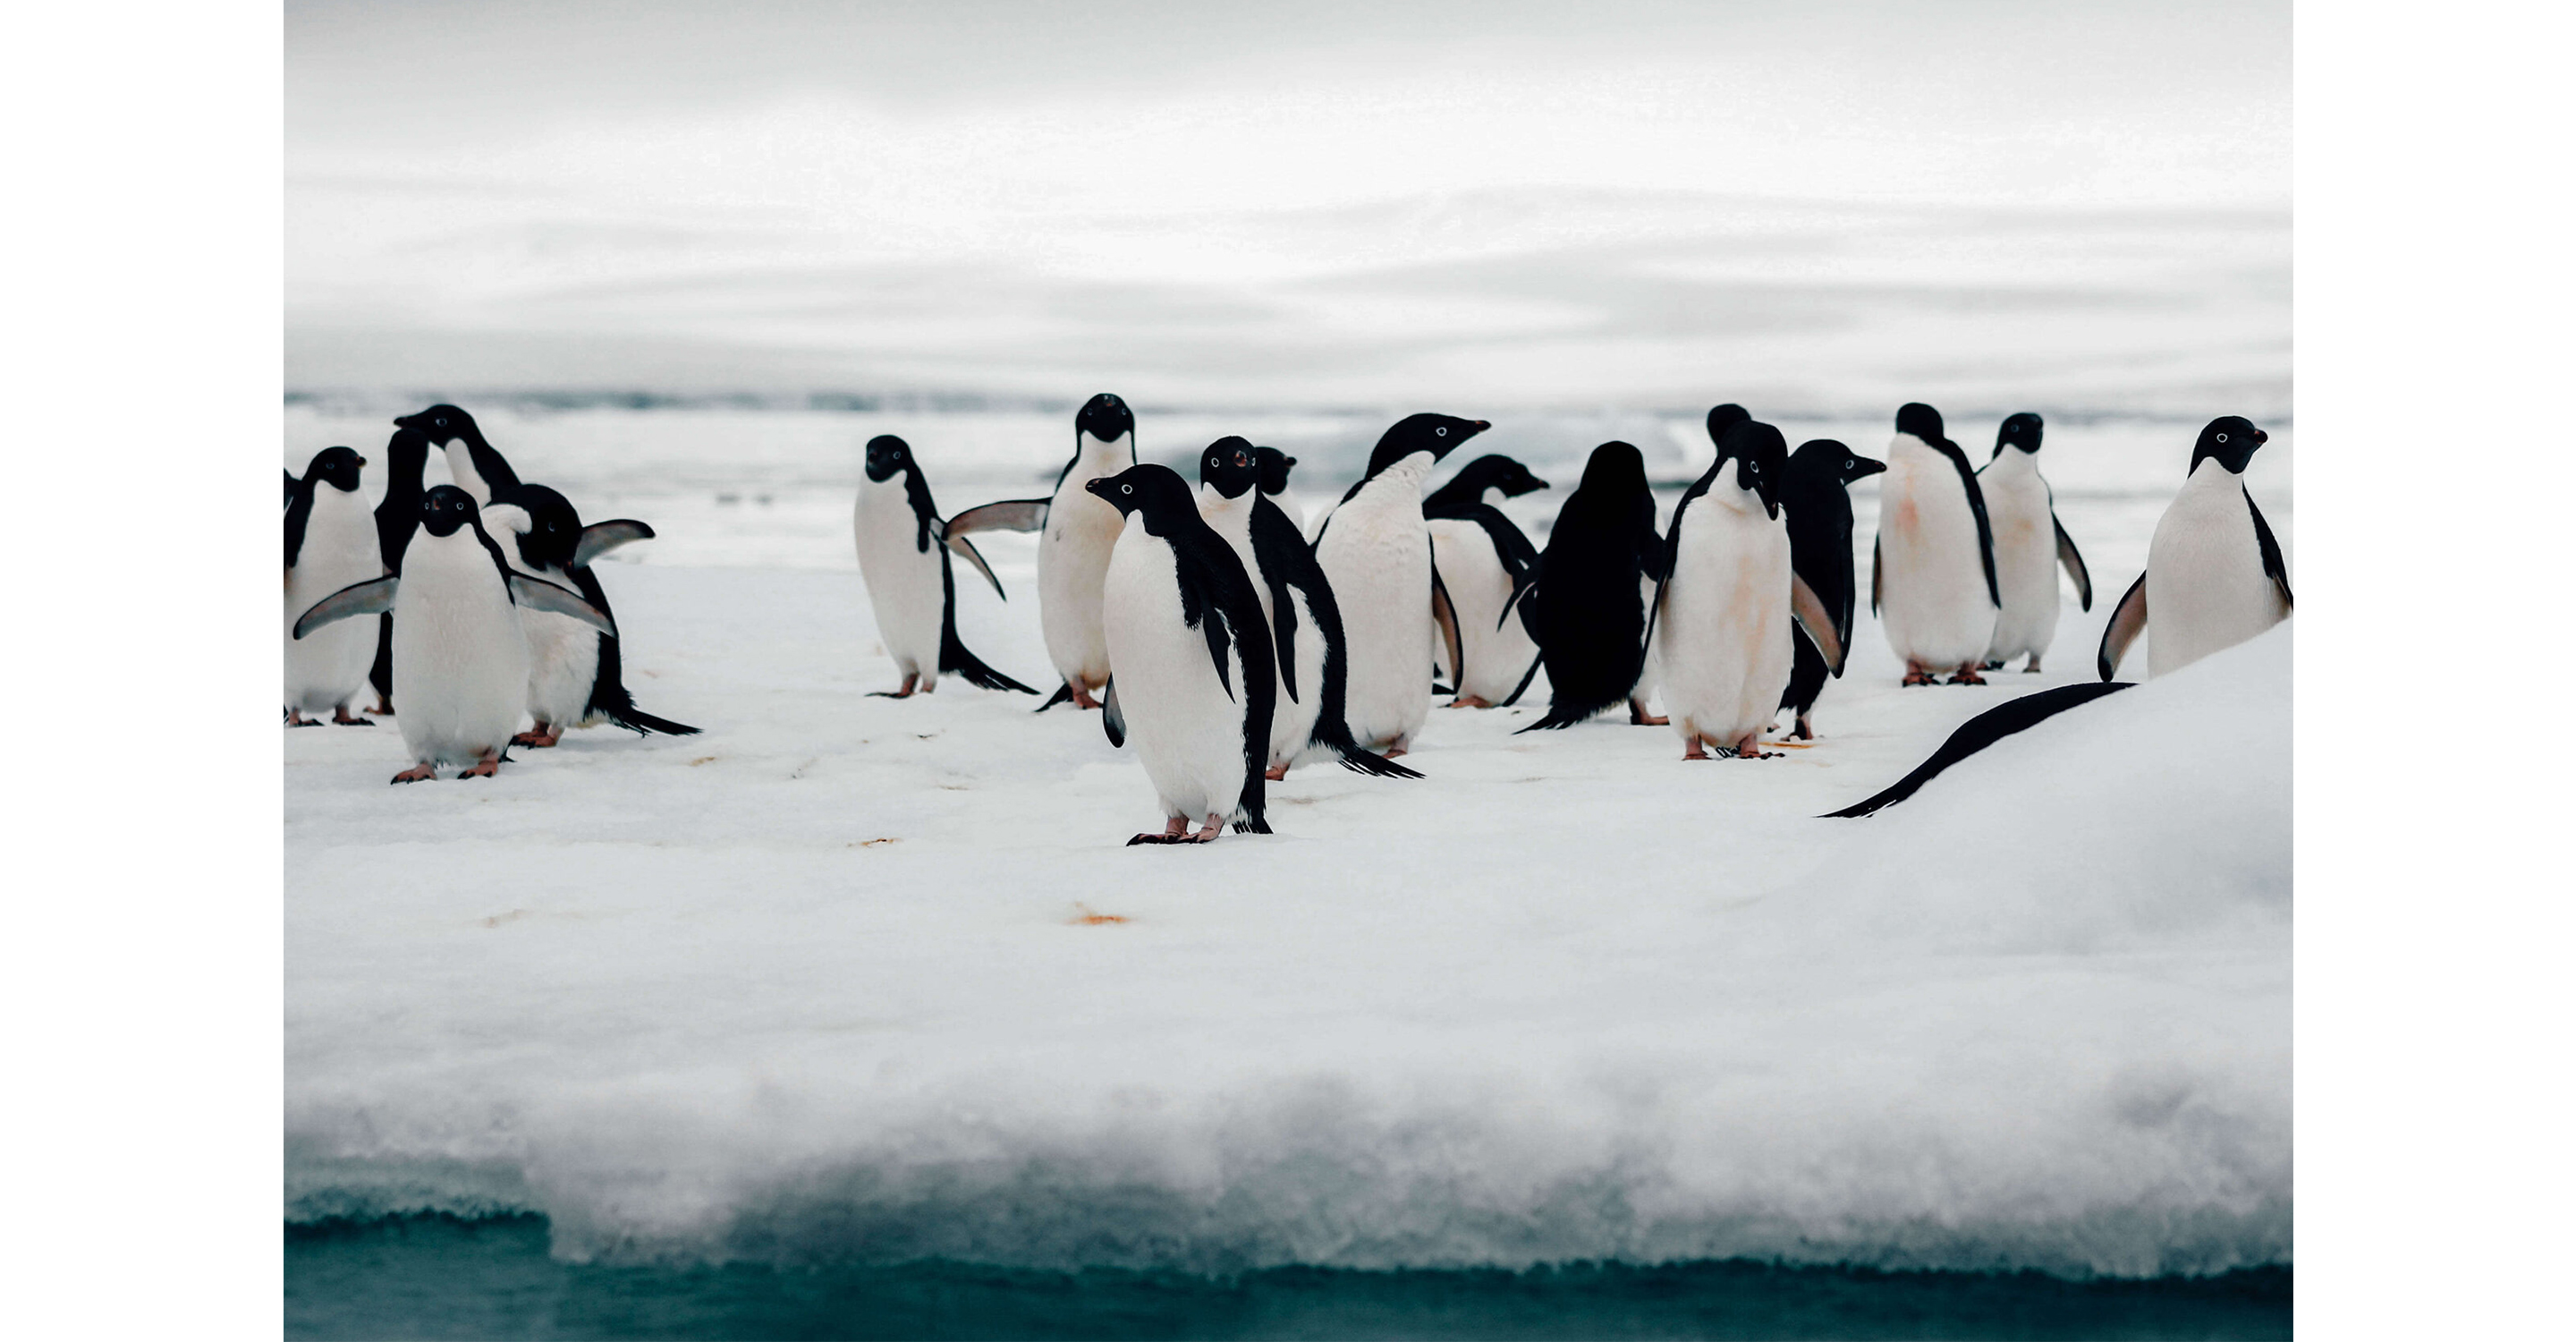 Seeing Adelie penguins up close on the Antarctic Peninsula.